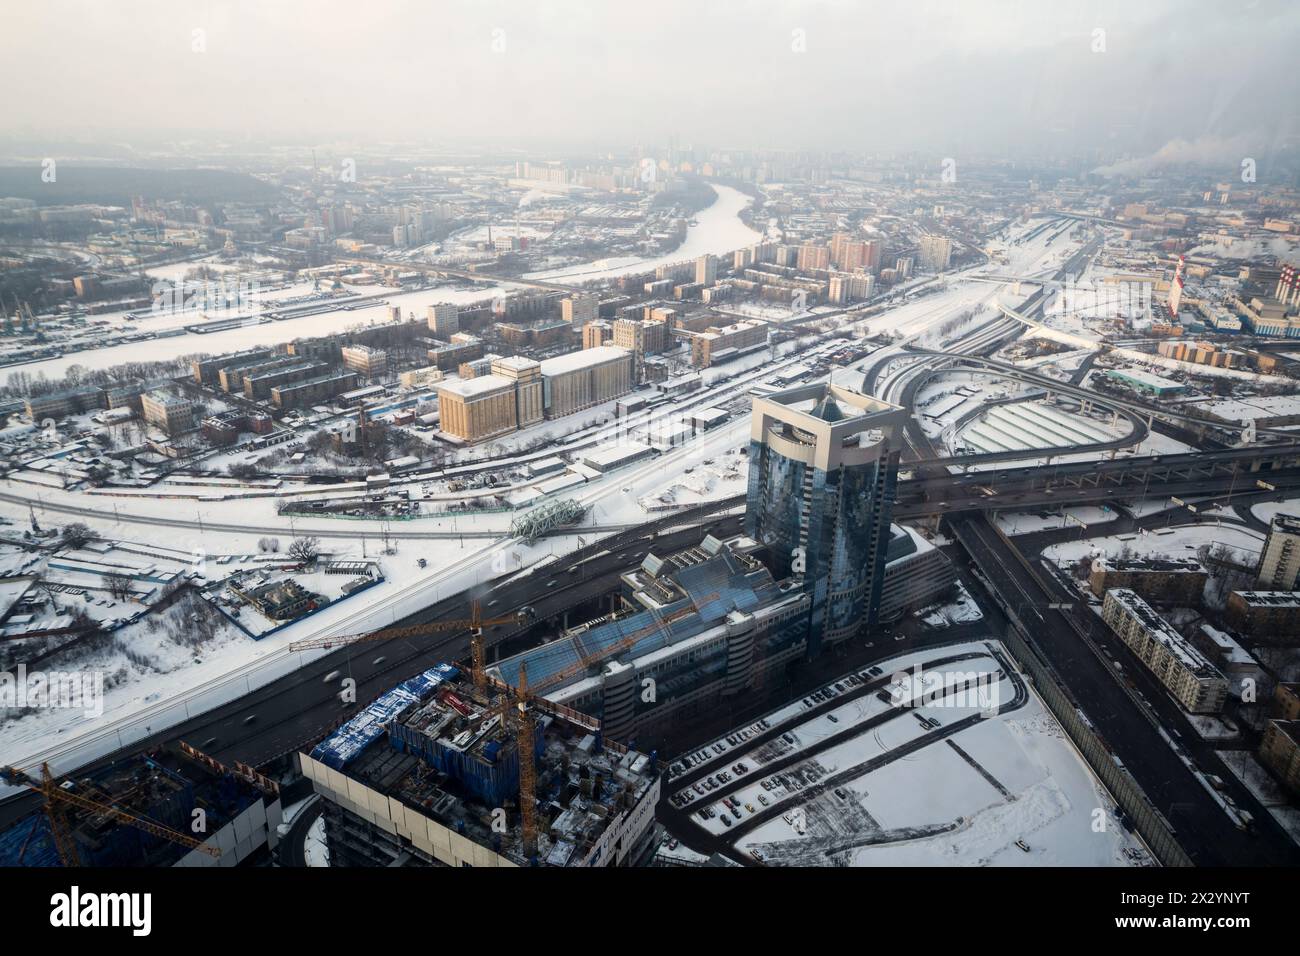 MOSCOW - JAN 2: Presnensky district in from Moscow City in the winter on January 2, 2013 in Moscow, Russia. Stock Photo